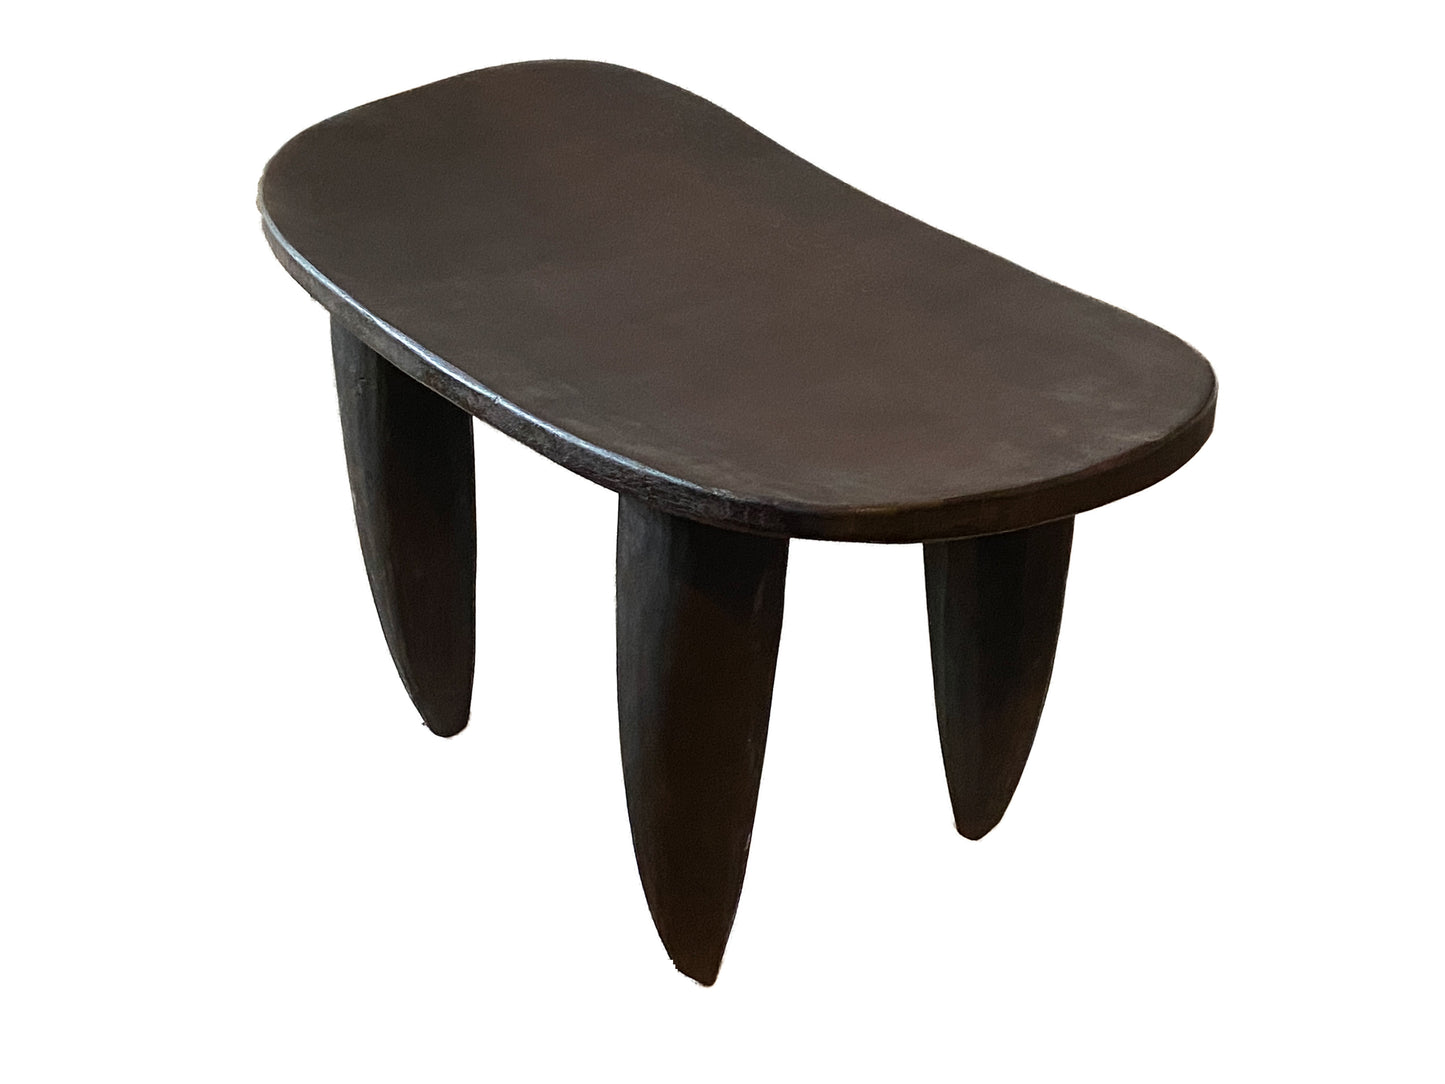 #3071 Superb African Senufo Stool / Table I Coast 17" H by 29.5" W